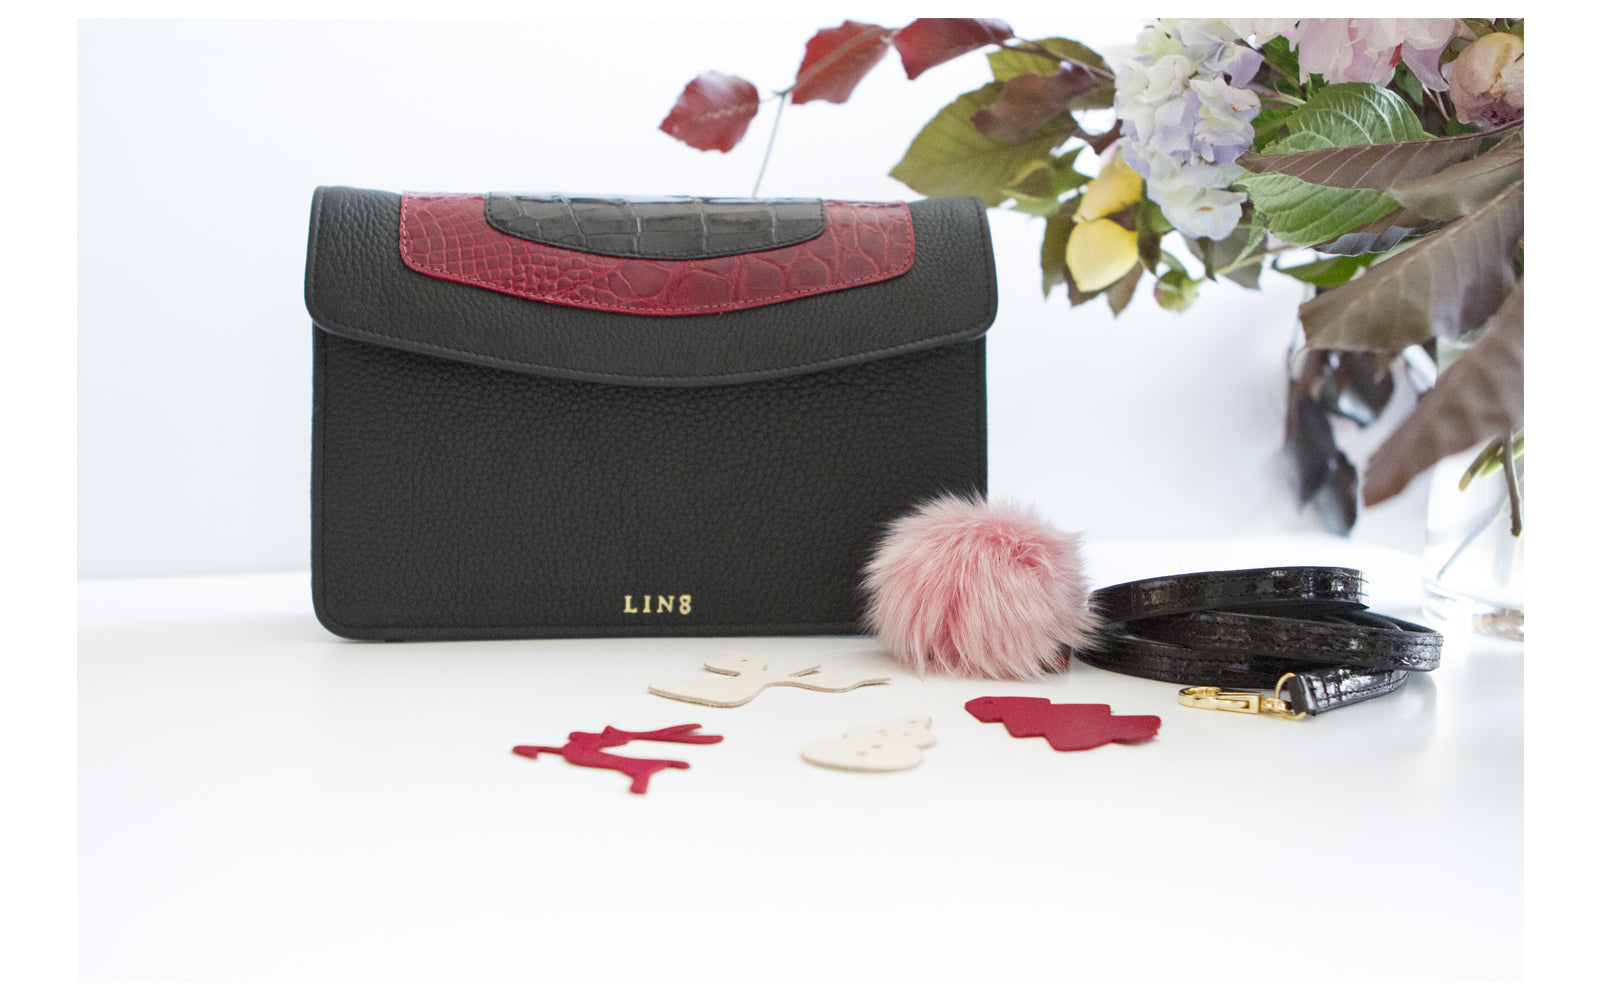 LIN8 Australia's bespoke luxury leather goods made in Australia. Made with genuine exotic crocodile leather. Create, design your leather goods, bag, handbag, purse, clutch, wallet, pet dog collar, gym lifting pulling straps